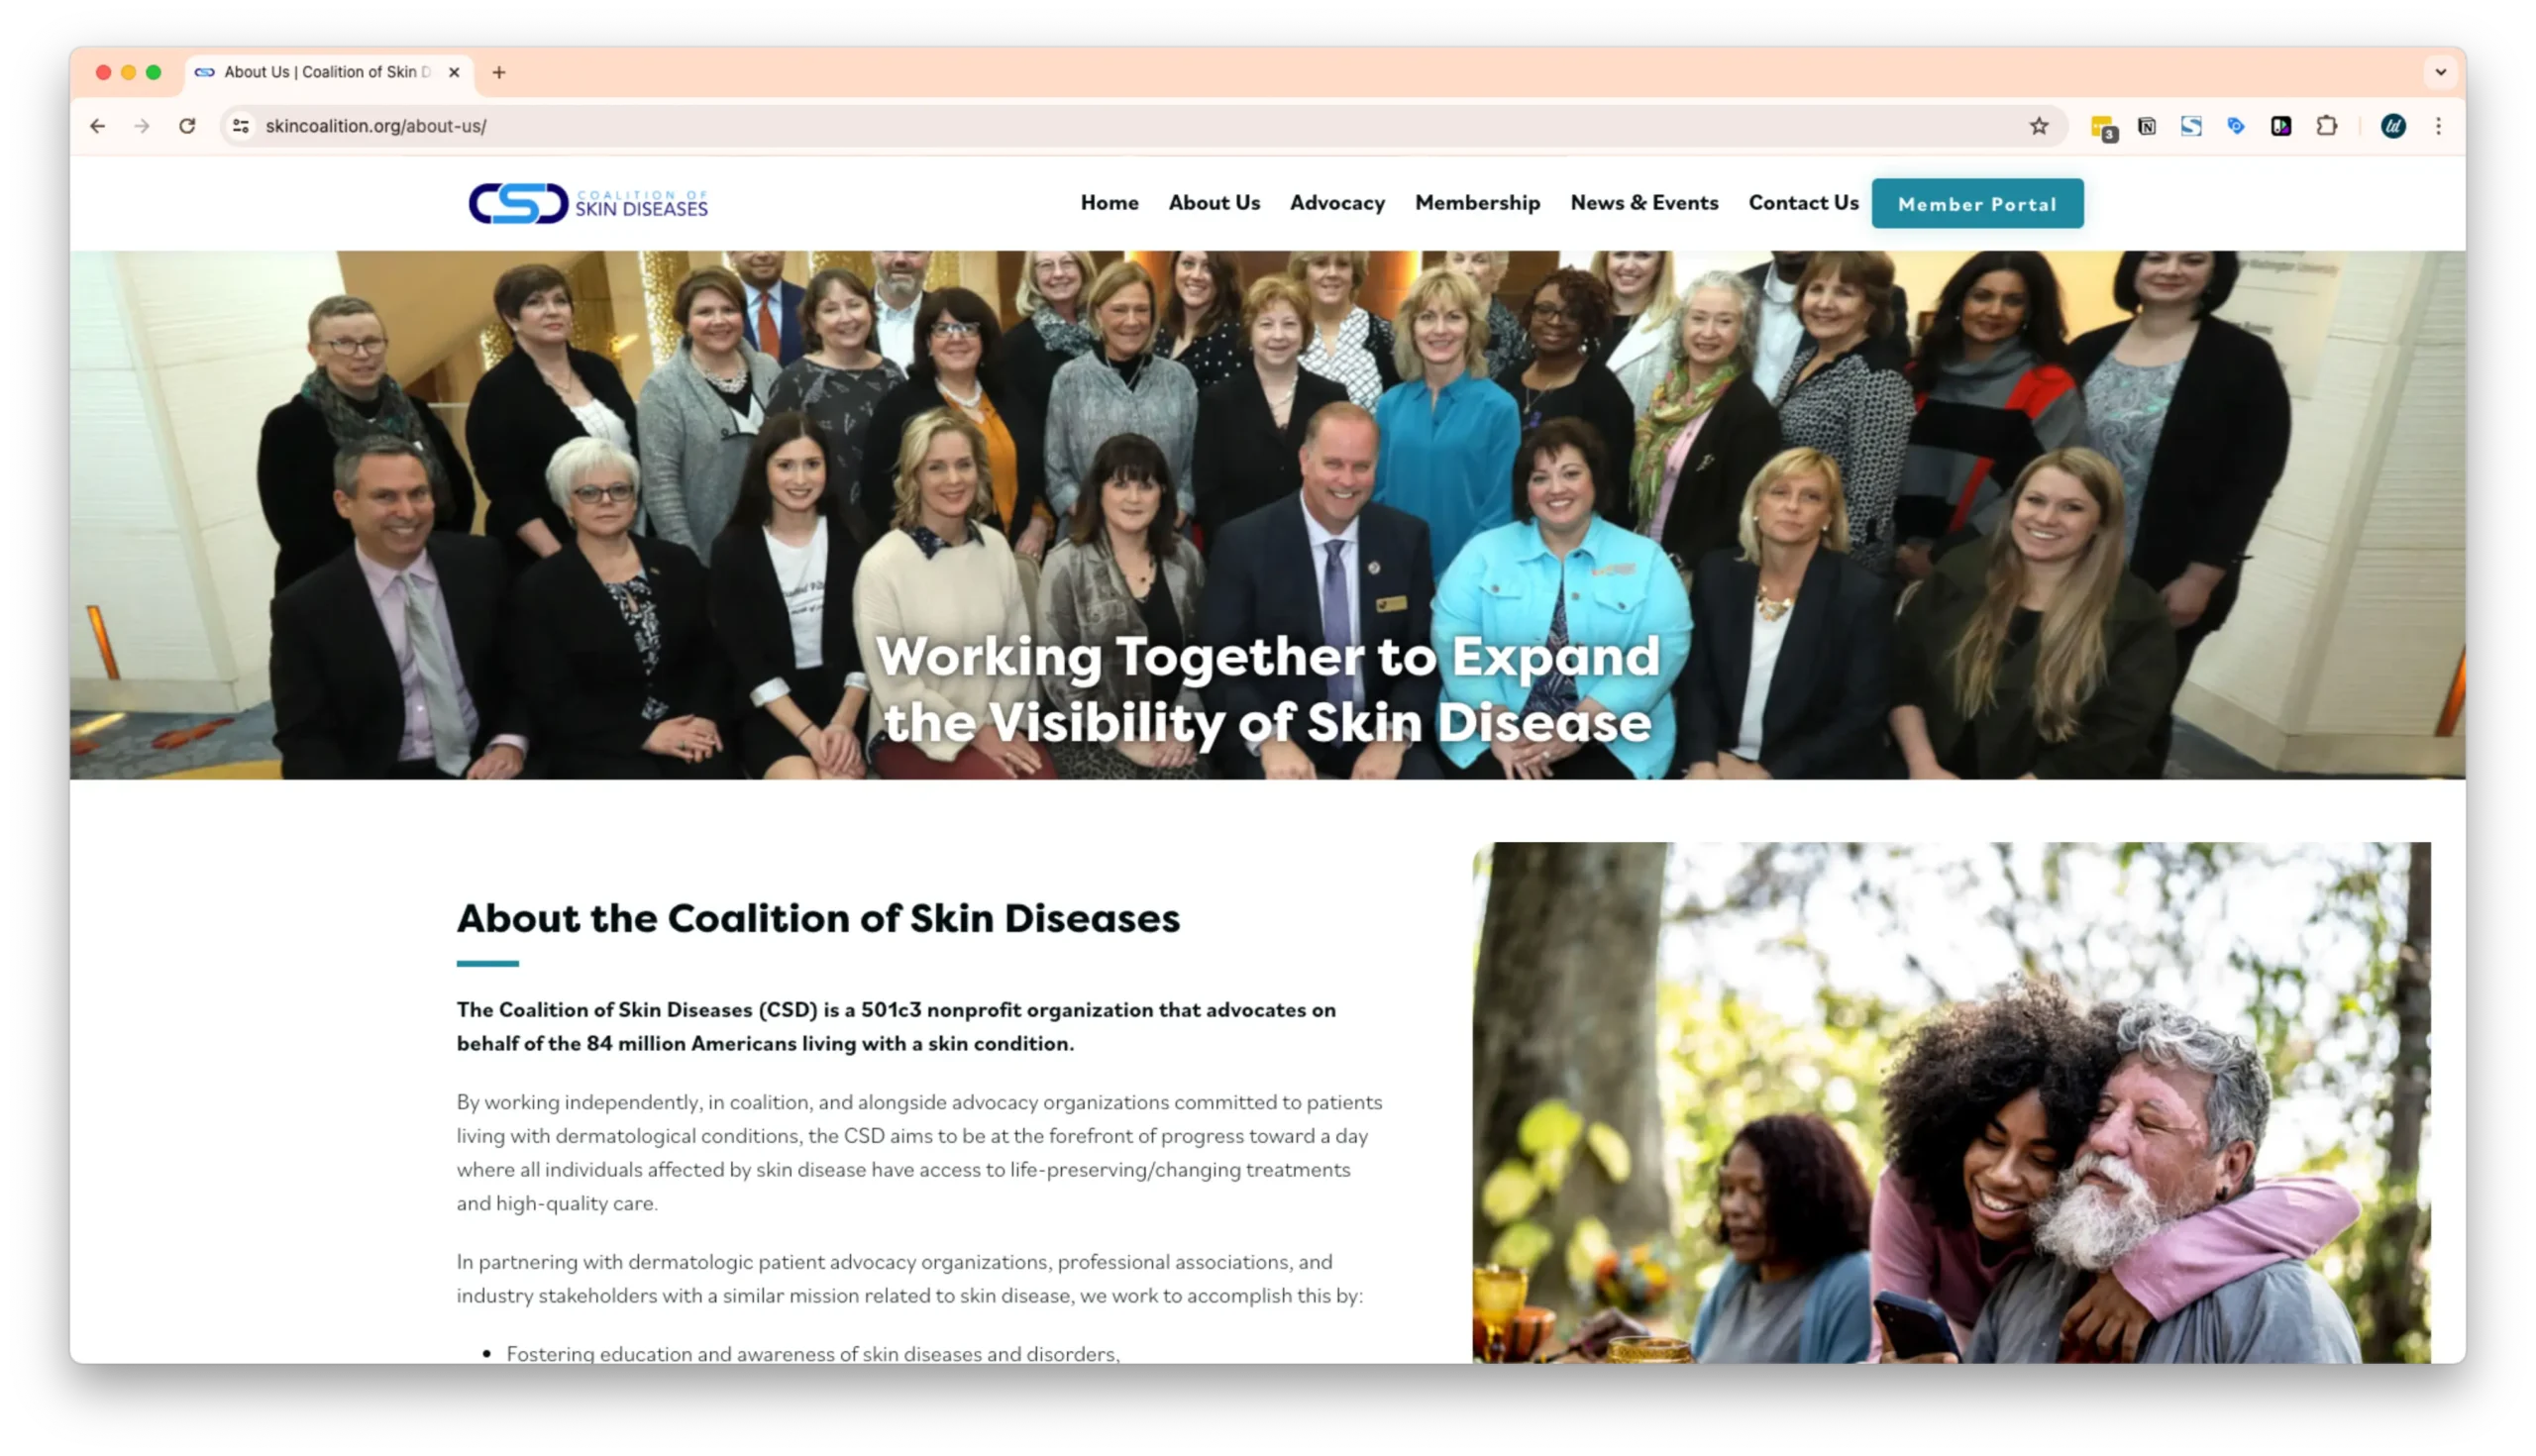 A webpage for the Coalition of Skin Diseases featuring a group photo of members with the text "Working Together to Expand the Visibility of Skin Disease." Below is a section about the organization and an image of a woman embracing an older man.